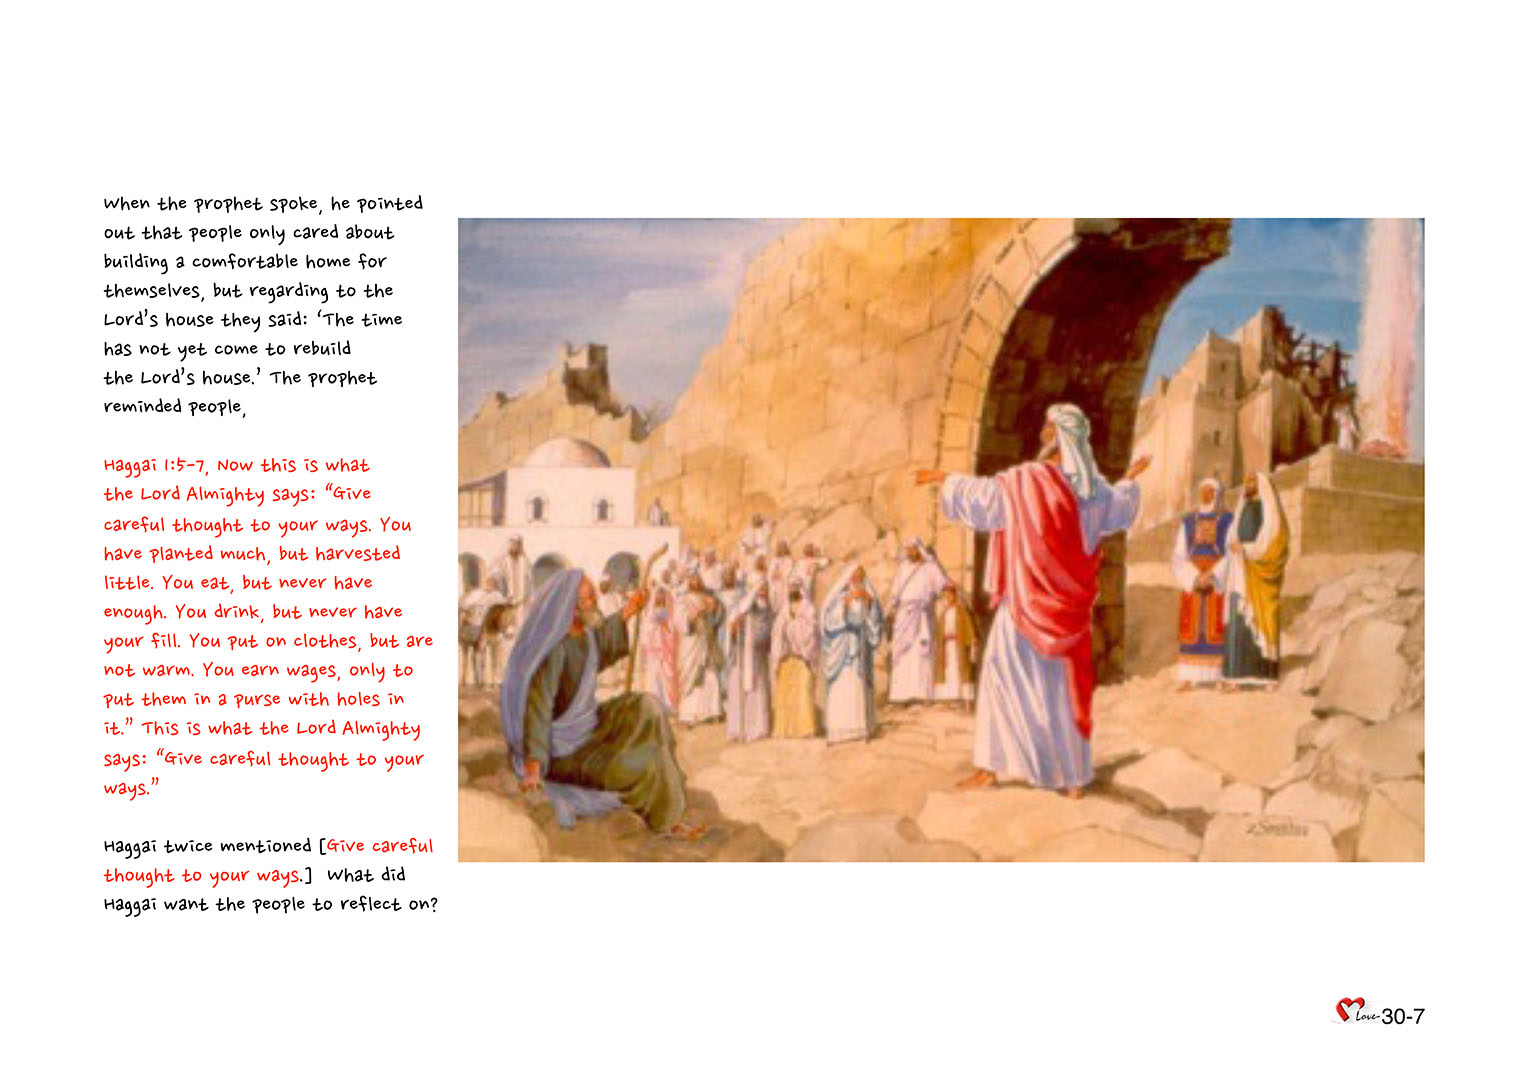 Chapter 30 - Lesson 94 - The Prophet After the Return- Haggai